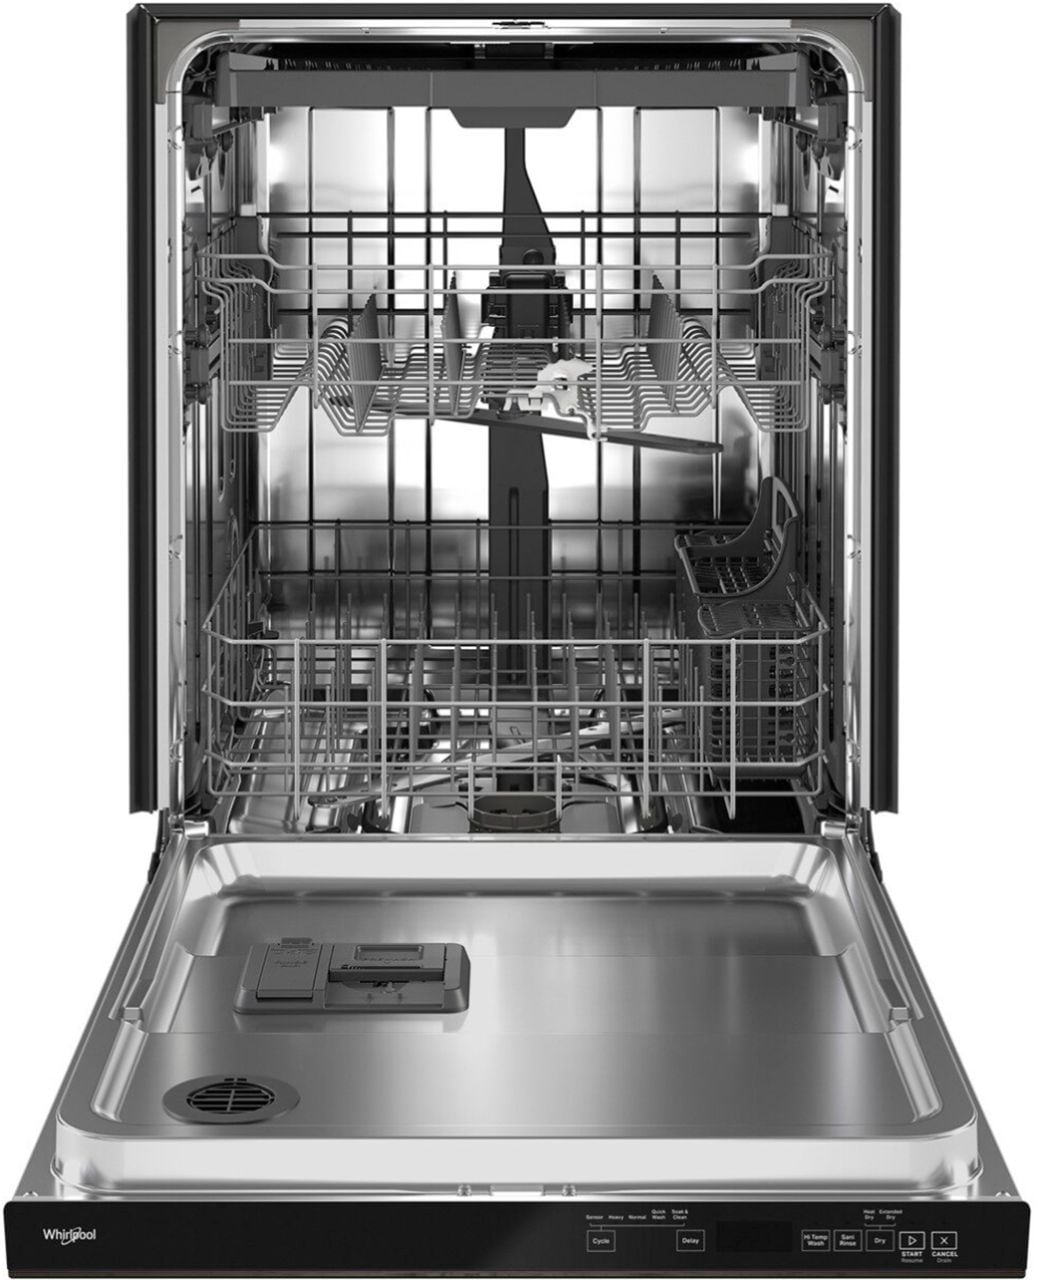 Whirlpool - 24" Top Control Built-In Dishwasher with Stainless Steel Tub, Large Capacity, 3rd Rack, 47 dBA - Stainless steel_12